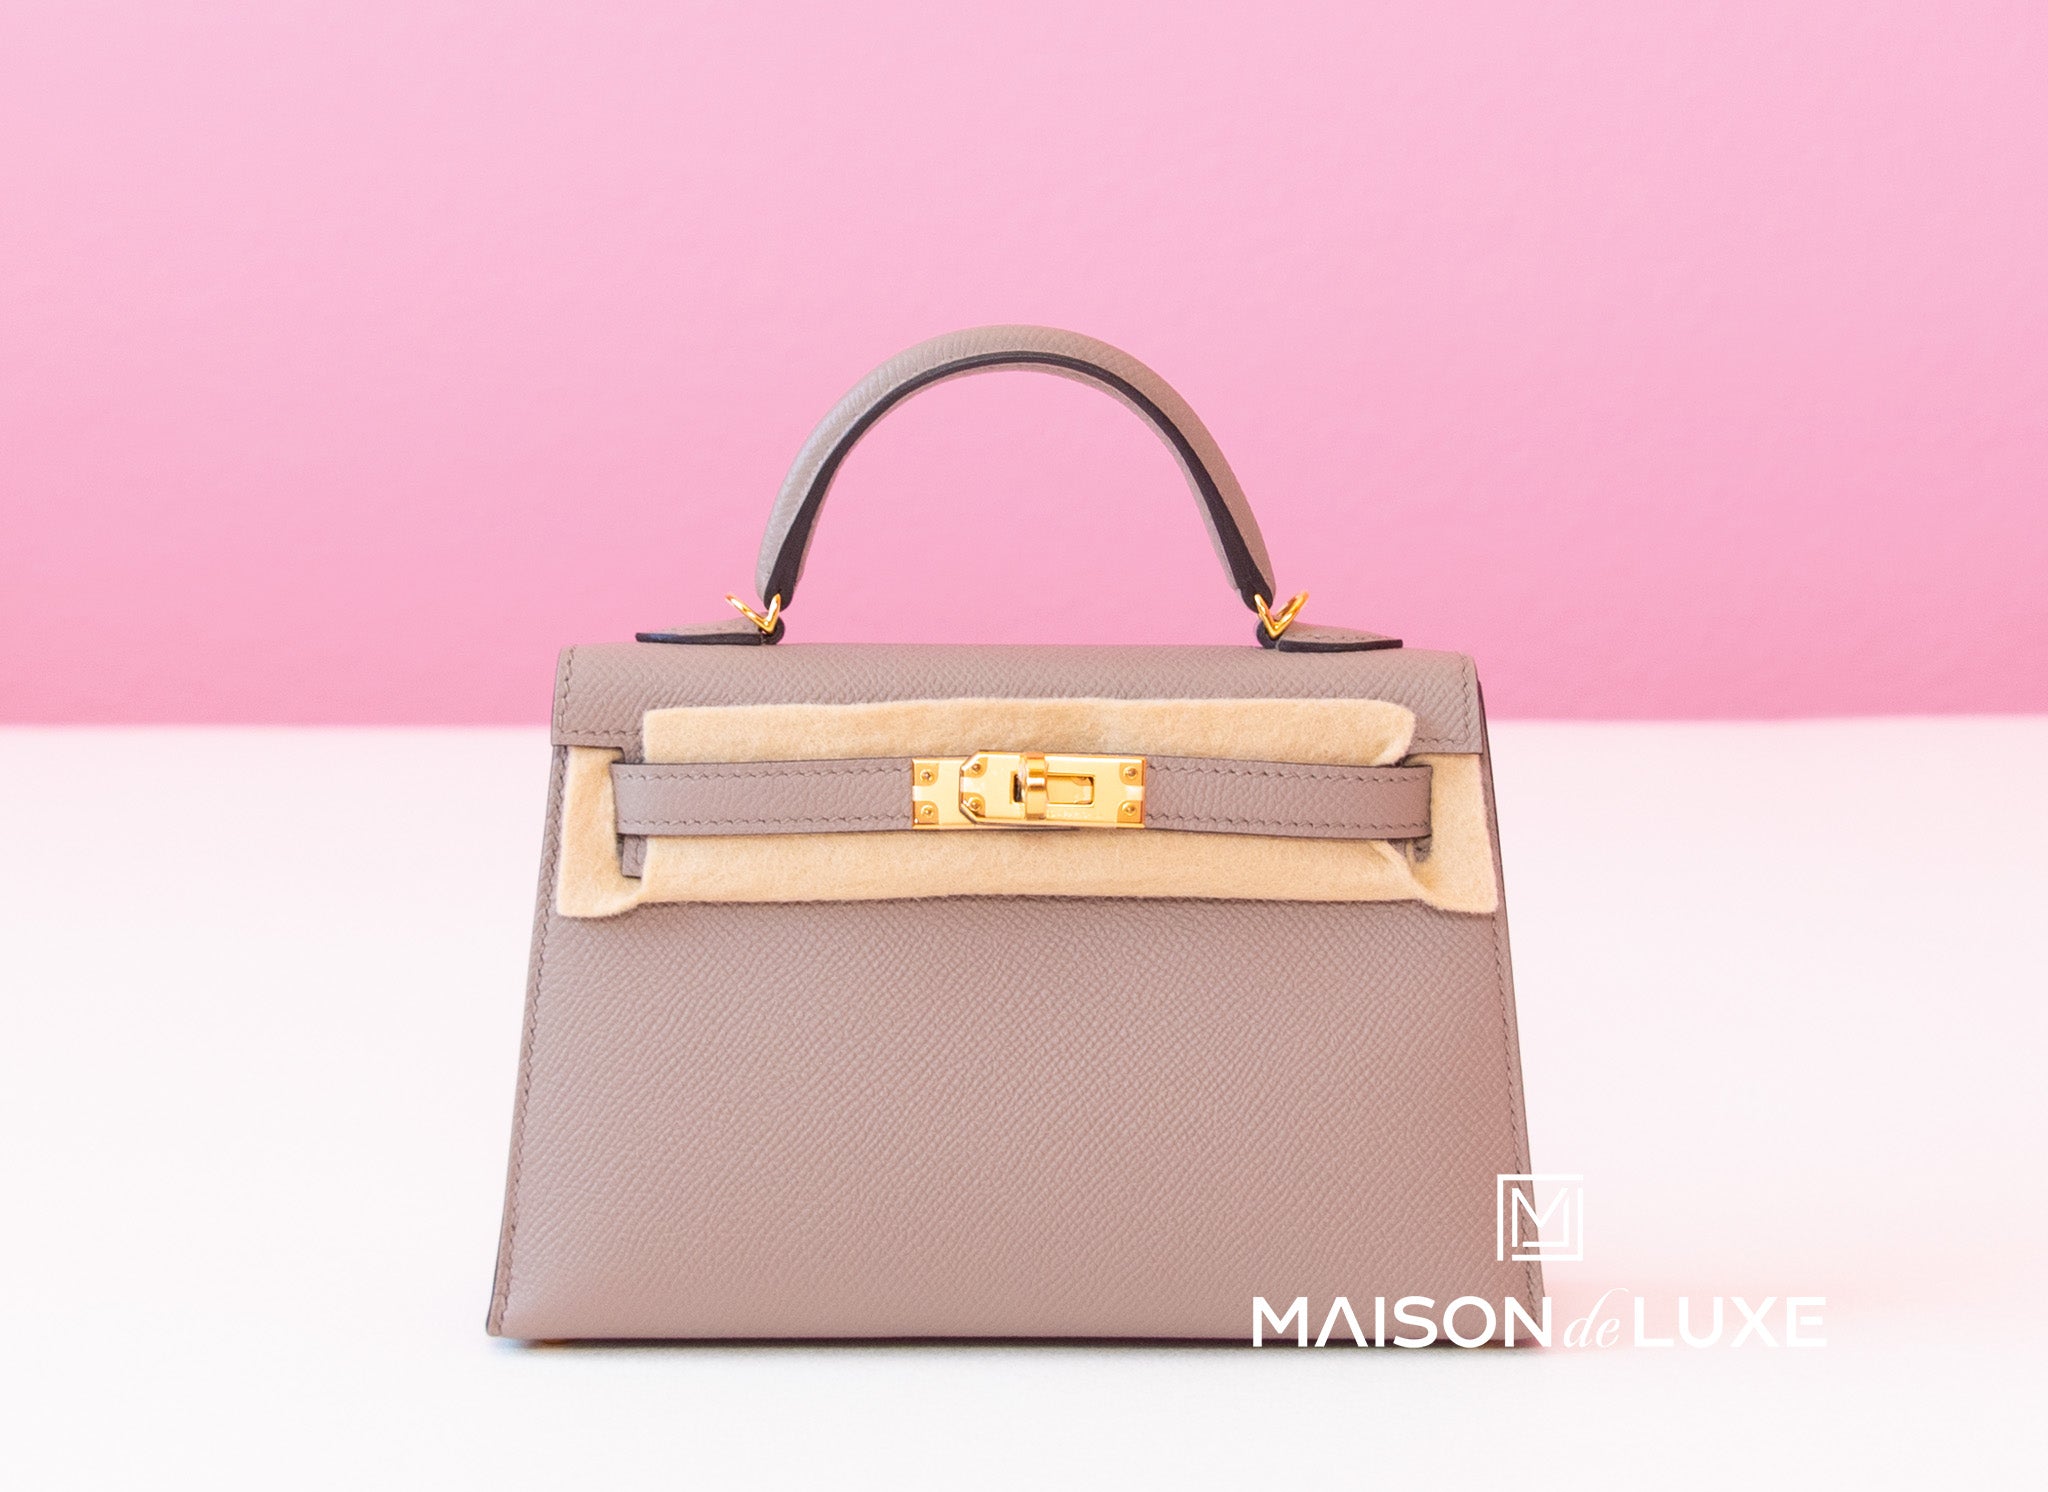 A GRIS ASPHALTE EPSOM LEATHER MINI KELLY 20 II WITH GOLD HARDWARE